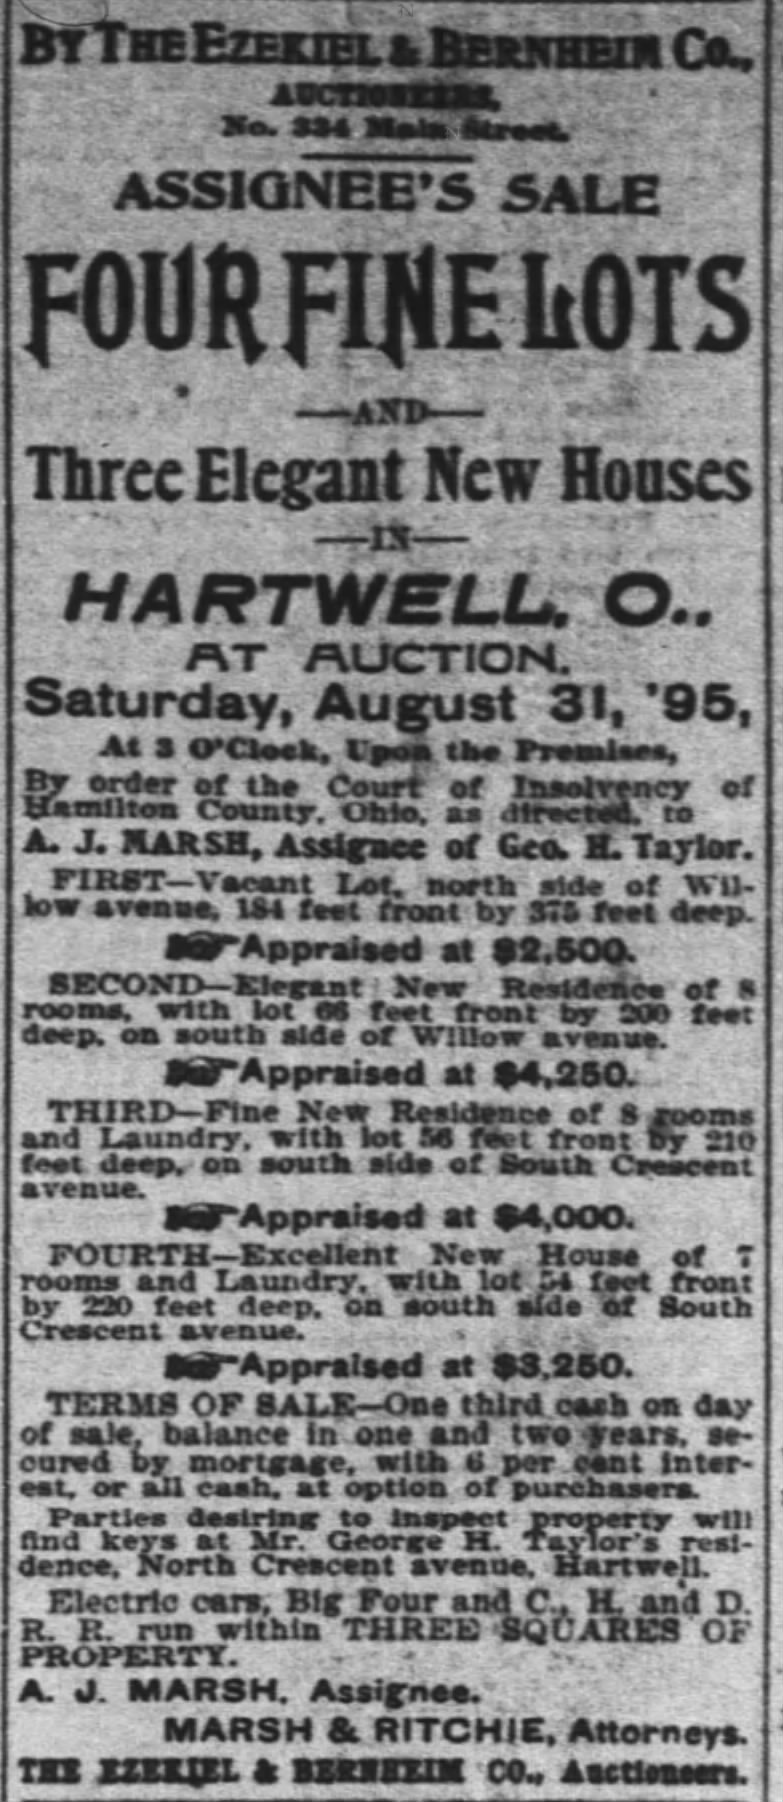 A.J. Marsh sells houses in Hartwell